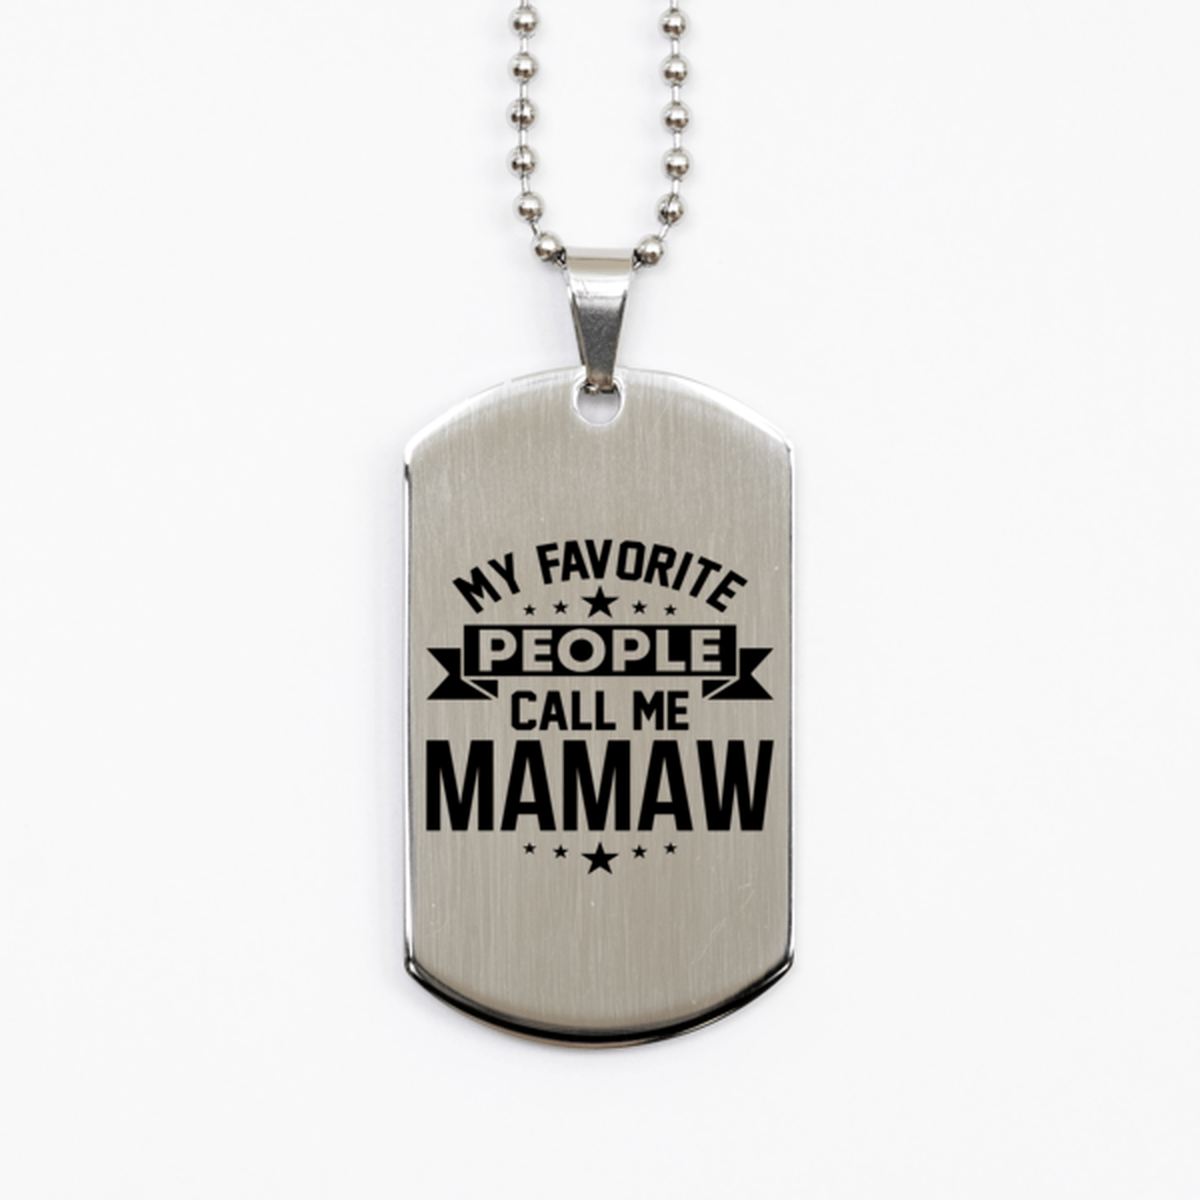 My Favorite People Call Me Mamaw, Funny Mamaw Silver Dog Tag Necklace, Best Birthday Gifts for Mamaw